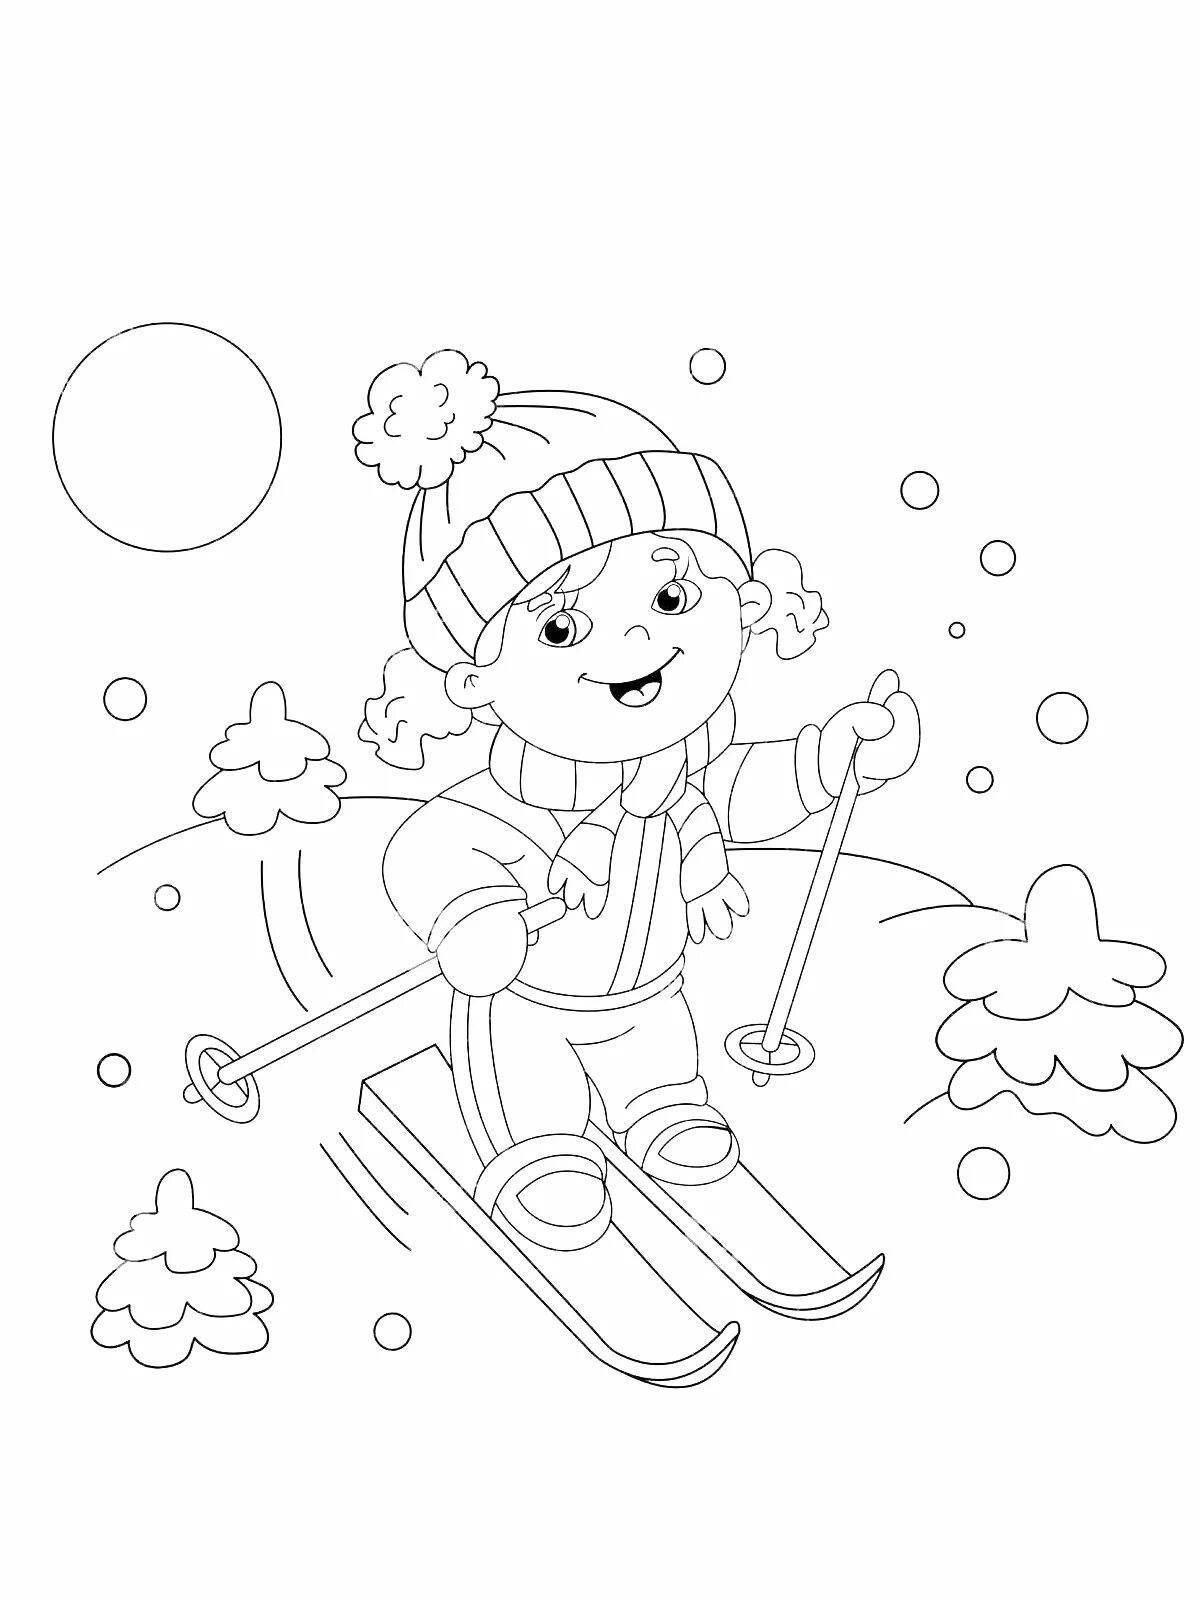 Sparkling skis coloring book